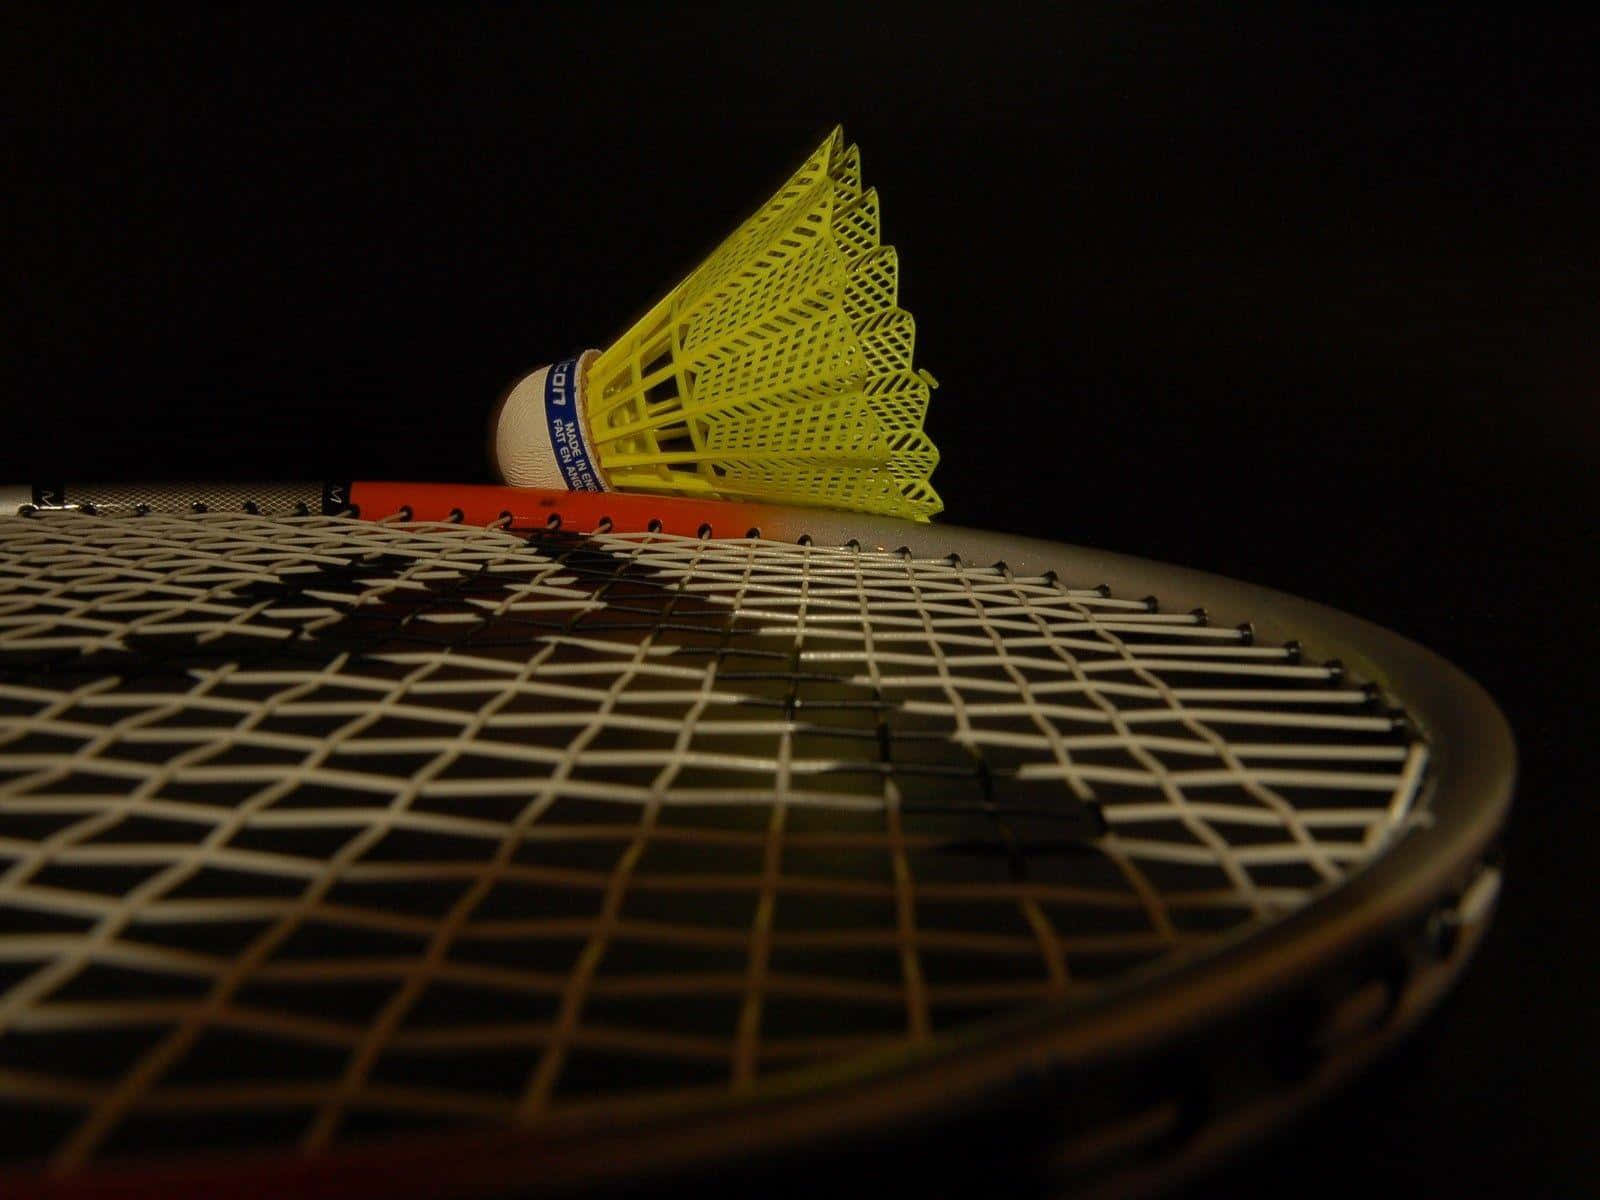 The fun of badminton just escalated!